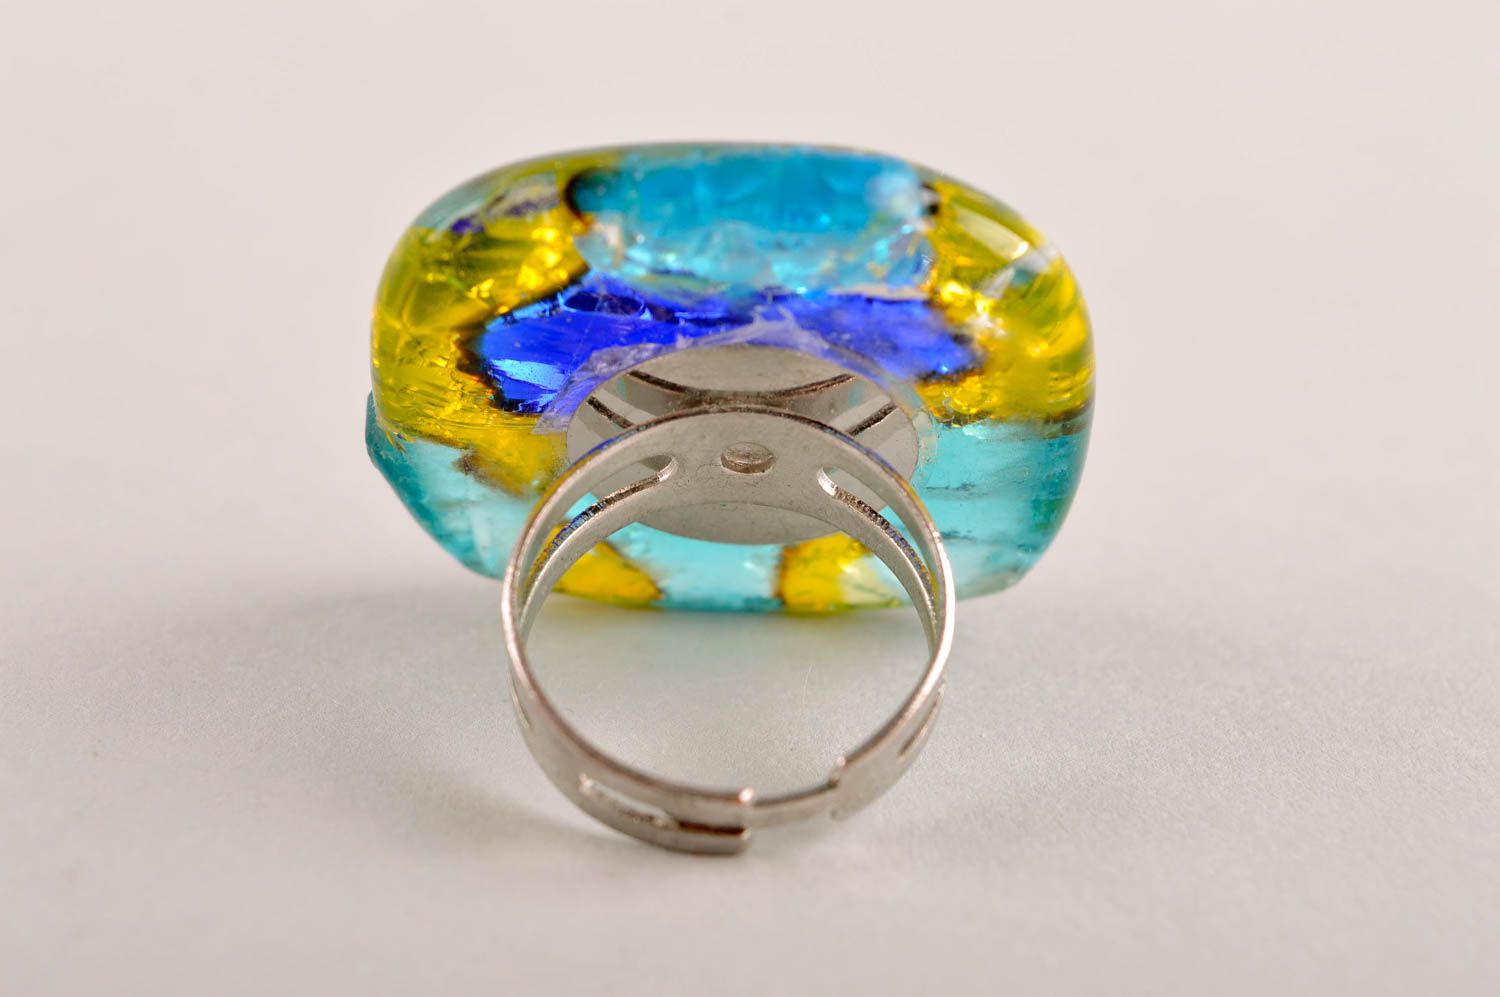 Handmade ring unusual ring glass ring gift ideas unusual glass accessory photo 4